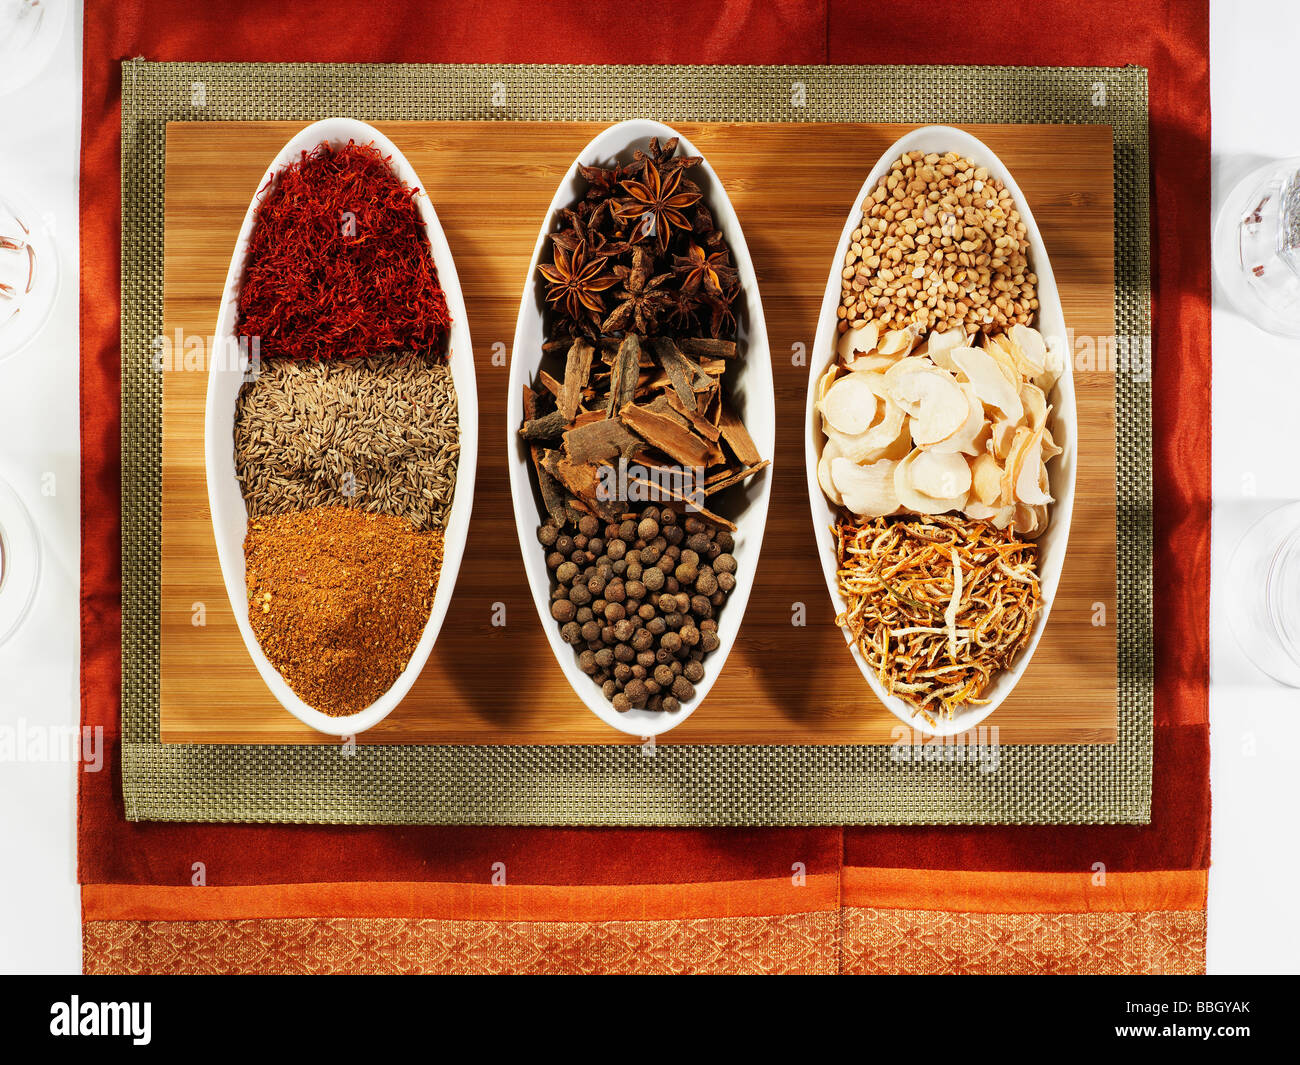 A selection of different spices in three white china bowls on a wooden placemat and red background Stock Photo